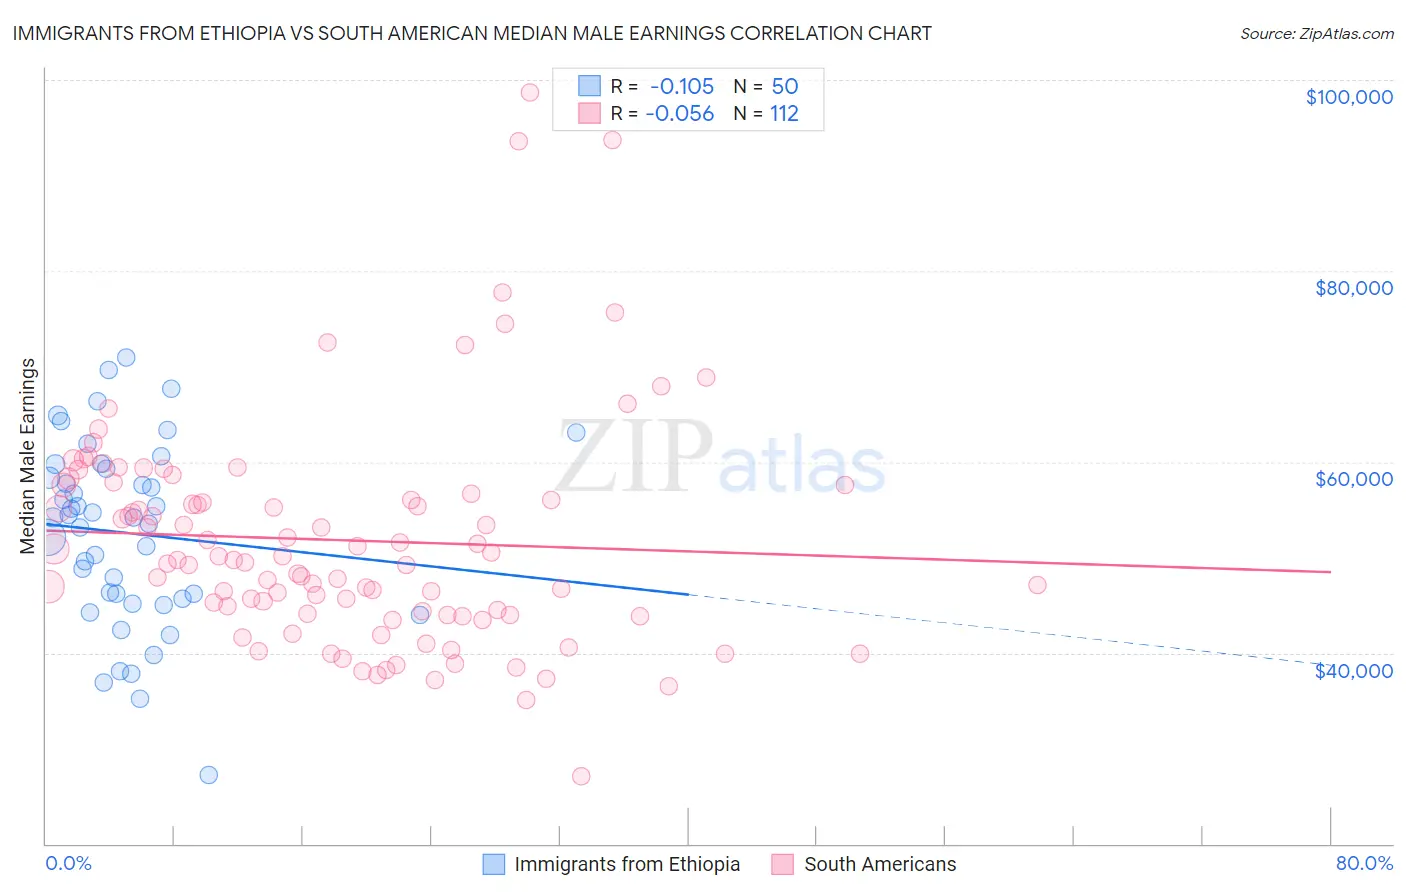 Immigrants from Ethiopia vs South American Median Male Earnings